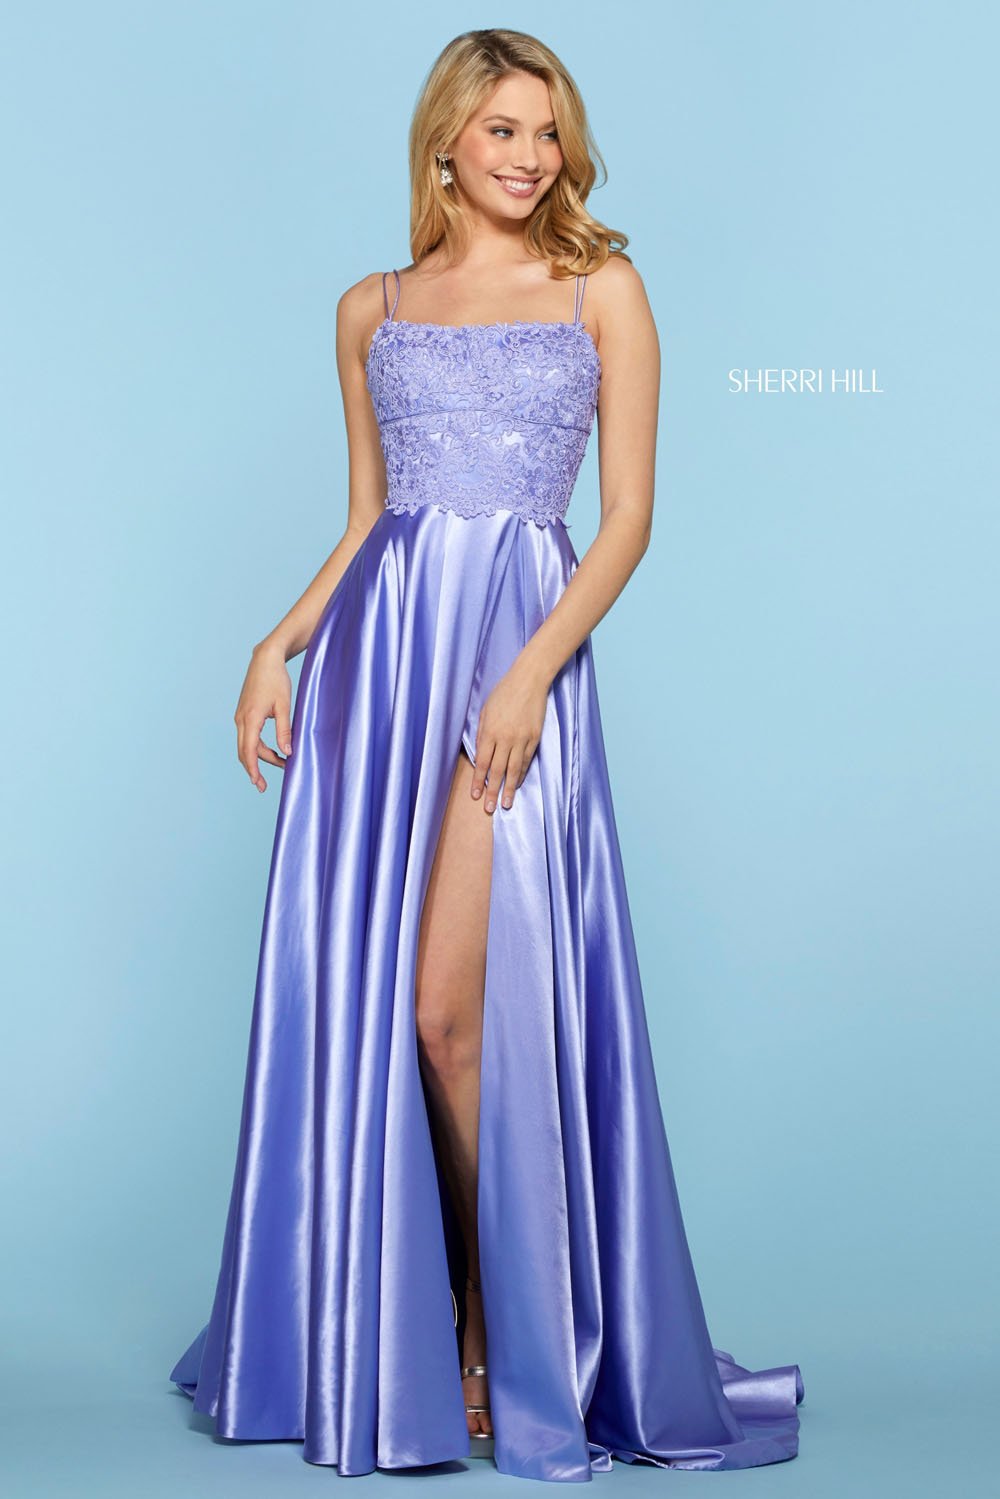 Sherri Hill 53300 dress images in these colors: Lilac, Coral, Rose, Red, Peacock, Ivory, Aqua, Vintage Coral, Yellow, Light Blue, Black, Navy.